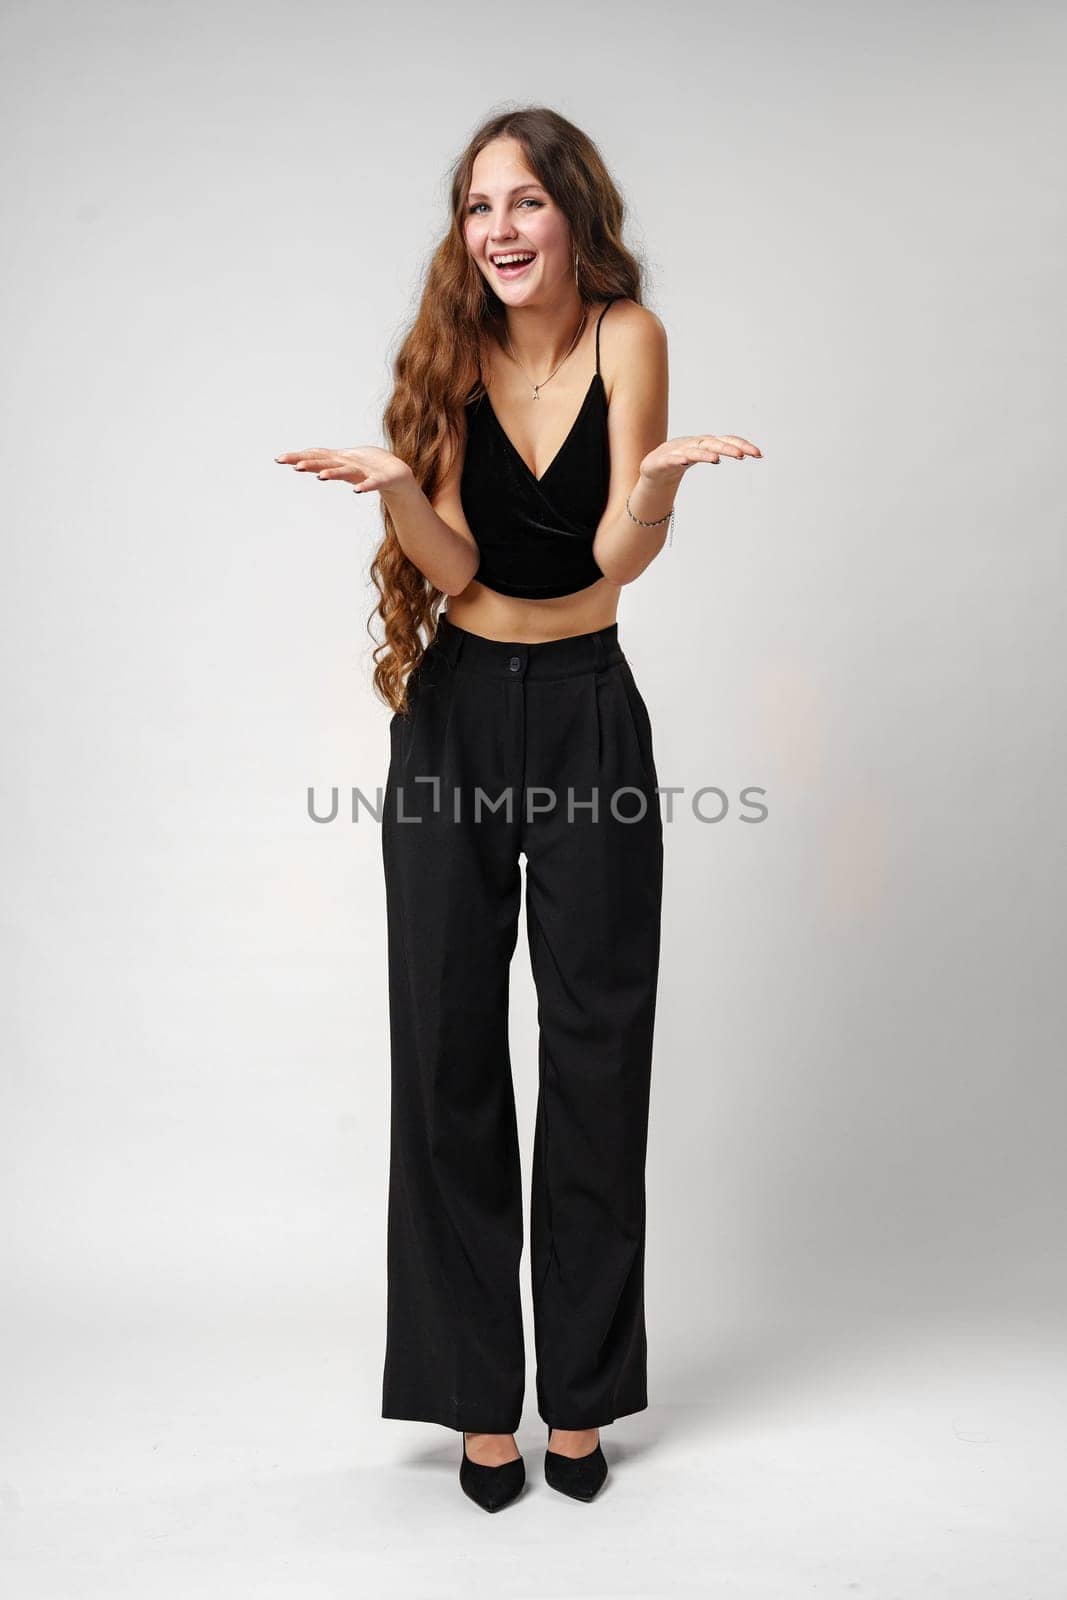 A young woman with long, wavy hair smiles broadly and gestures animatedly with her hands, expressing excitement and happiness. She is wearing a black V-neck top and stands against a simple, uncluttered backdrop that accentuates her lively demeanor.